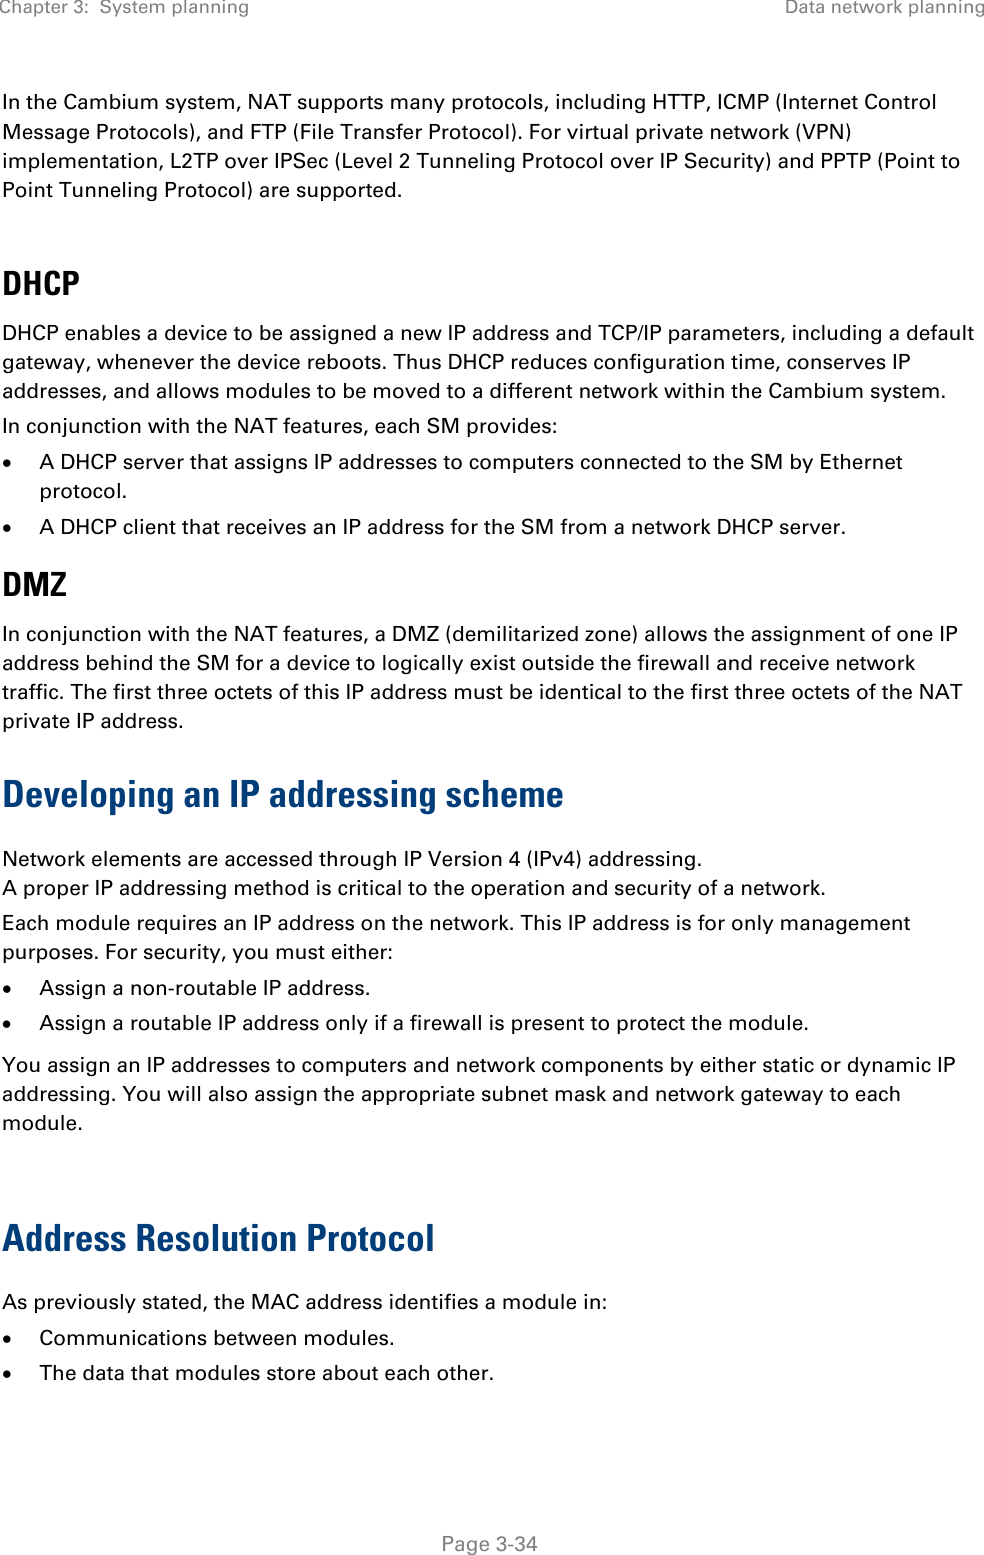 Chapter 3:  System planning Data network planning   Page 3-34 In the Cambium system, NAT supports many protocols, including HTTP, ICMP (Internet Control Message Protocols), and FTP (File Transfer Protocol). For virtual private network (VPN) implementation, L2TP over IPSec (Level 2 Tunneling Protocol over IP Security) and PPTP (Point to Point Tunneling Protocol) are supported.   DHCP DHCP enables a device to be assigned a new IP address and TCP/IP parameters, including a default gateway, whenever the device reboots. Thus DHCP reduces configuration time, conserves IP addresses, and allows modules to be moved to a different network within the Cambium system. In conjunction with the NAT features, each SM provides: • A DHCP server that assigns IP addresses to computers connected to the SM by Ethernet protocol. • A DHCP client that receives an IP address for the SM from a network DHCP server. DMZ In conjunction with the NAT features, a DMZ (demilitarized zone) allows the assignment of one IP address behind the SM for a device to logically exist outside the firewall and receive network traffic. The first three octets of this IP address must be identical to the first three octets of the NAT private IP address. Developing an IP addressing scheme Network elements are accessed through IP Version 4 (IPv4) addressing.  A proper IP addressing method is critical to the operation and security of a network. Each module requires an IP address on the network. This IP address is for only management purposes. For security, you must either: • Assign a non-routable IP address. • Assign a routable IP address only if a firewall is present to protect the module.  You assign an IP addresses to computers and network components by either static or dynamic IP addressing. You will also assign the appropriate subnet mask and network gateway to each module.   Address Resolution Protocol As previously stated, the MAC address identifies a module in: • Communications between modules. • The data that modules store about each other. 